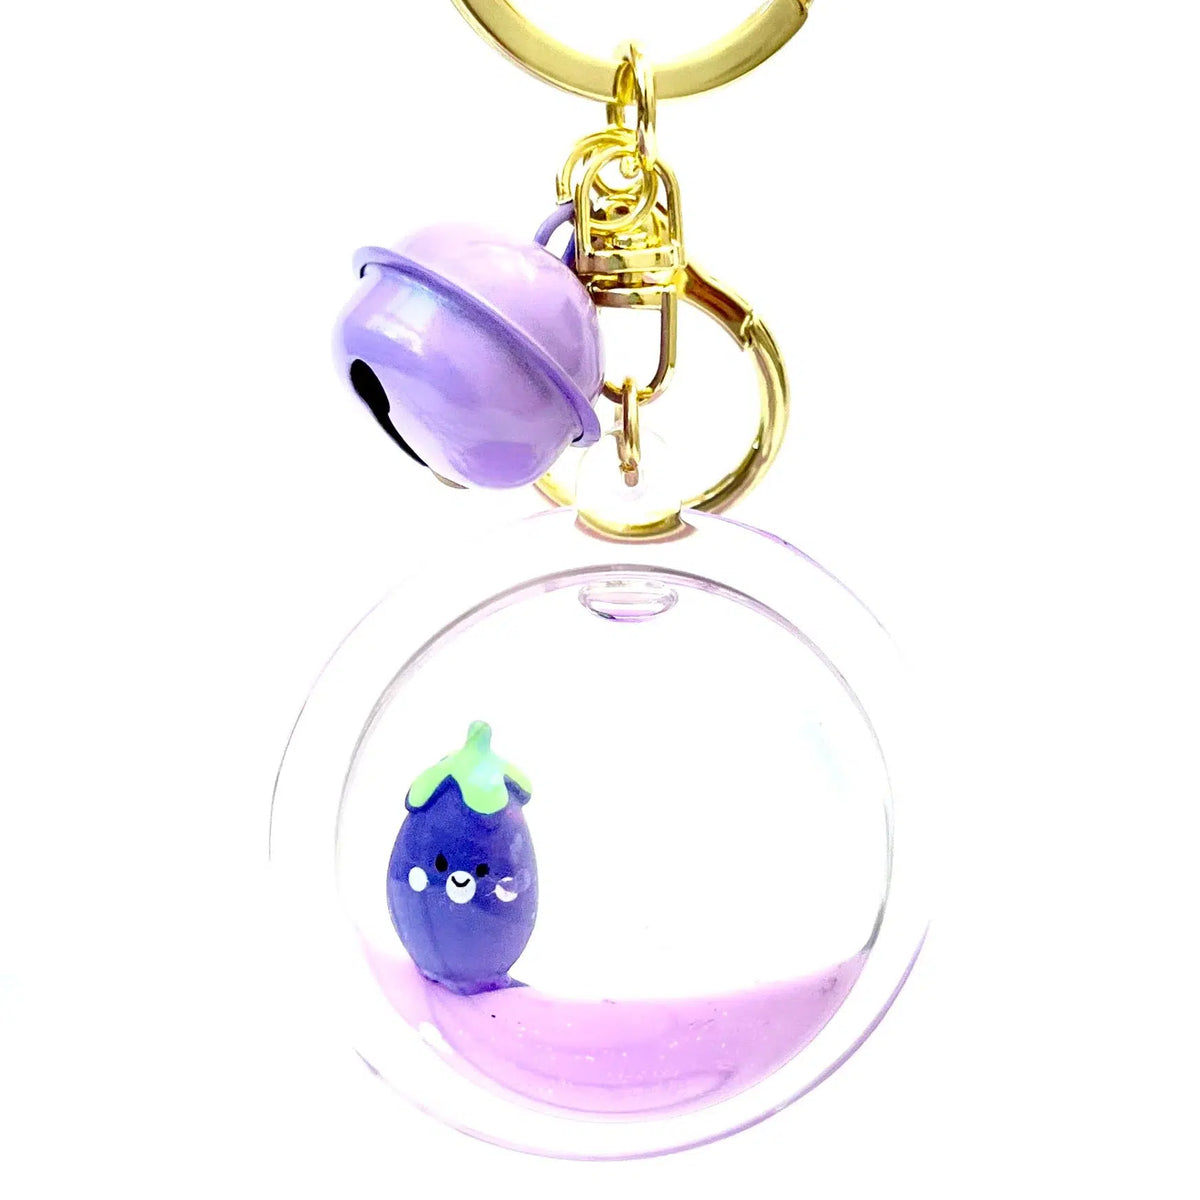 Front view of the saucer shaped Eggplant Floaty Key Charm showing the bell at the top of the keychain.